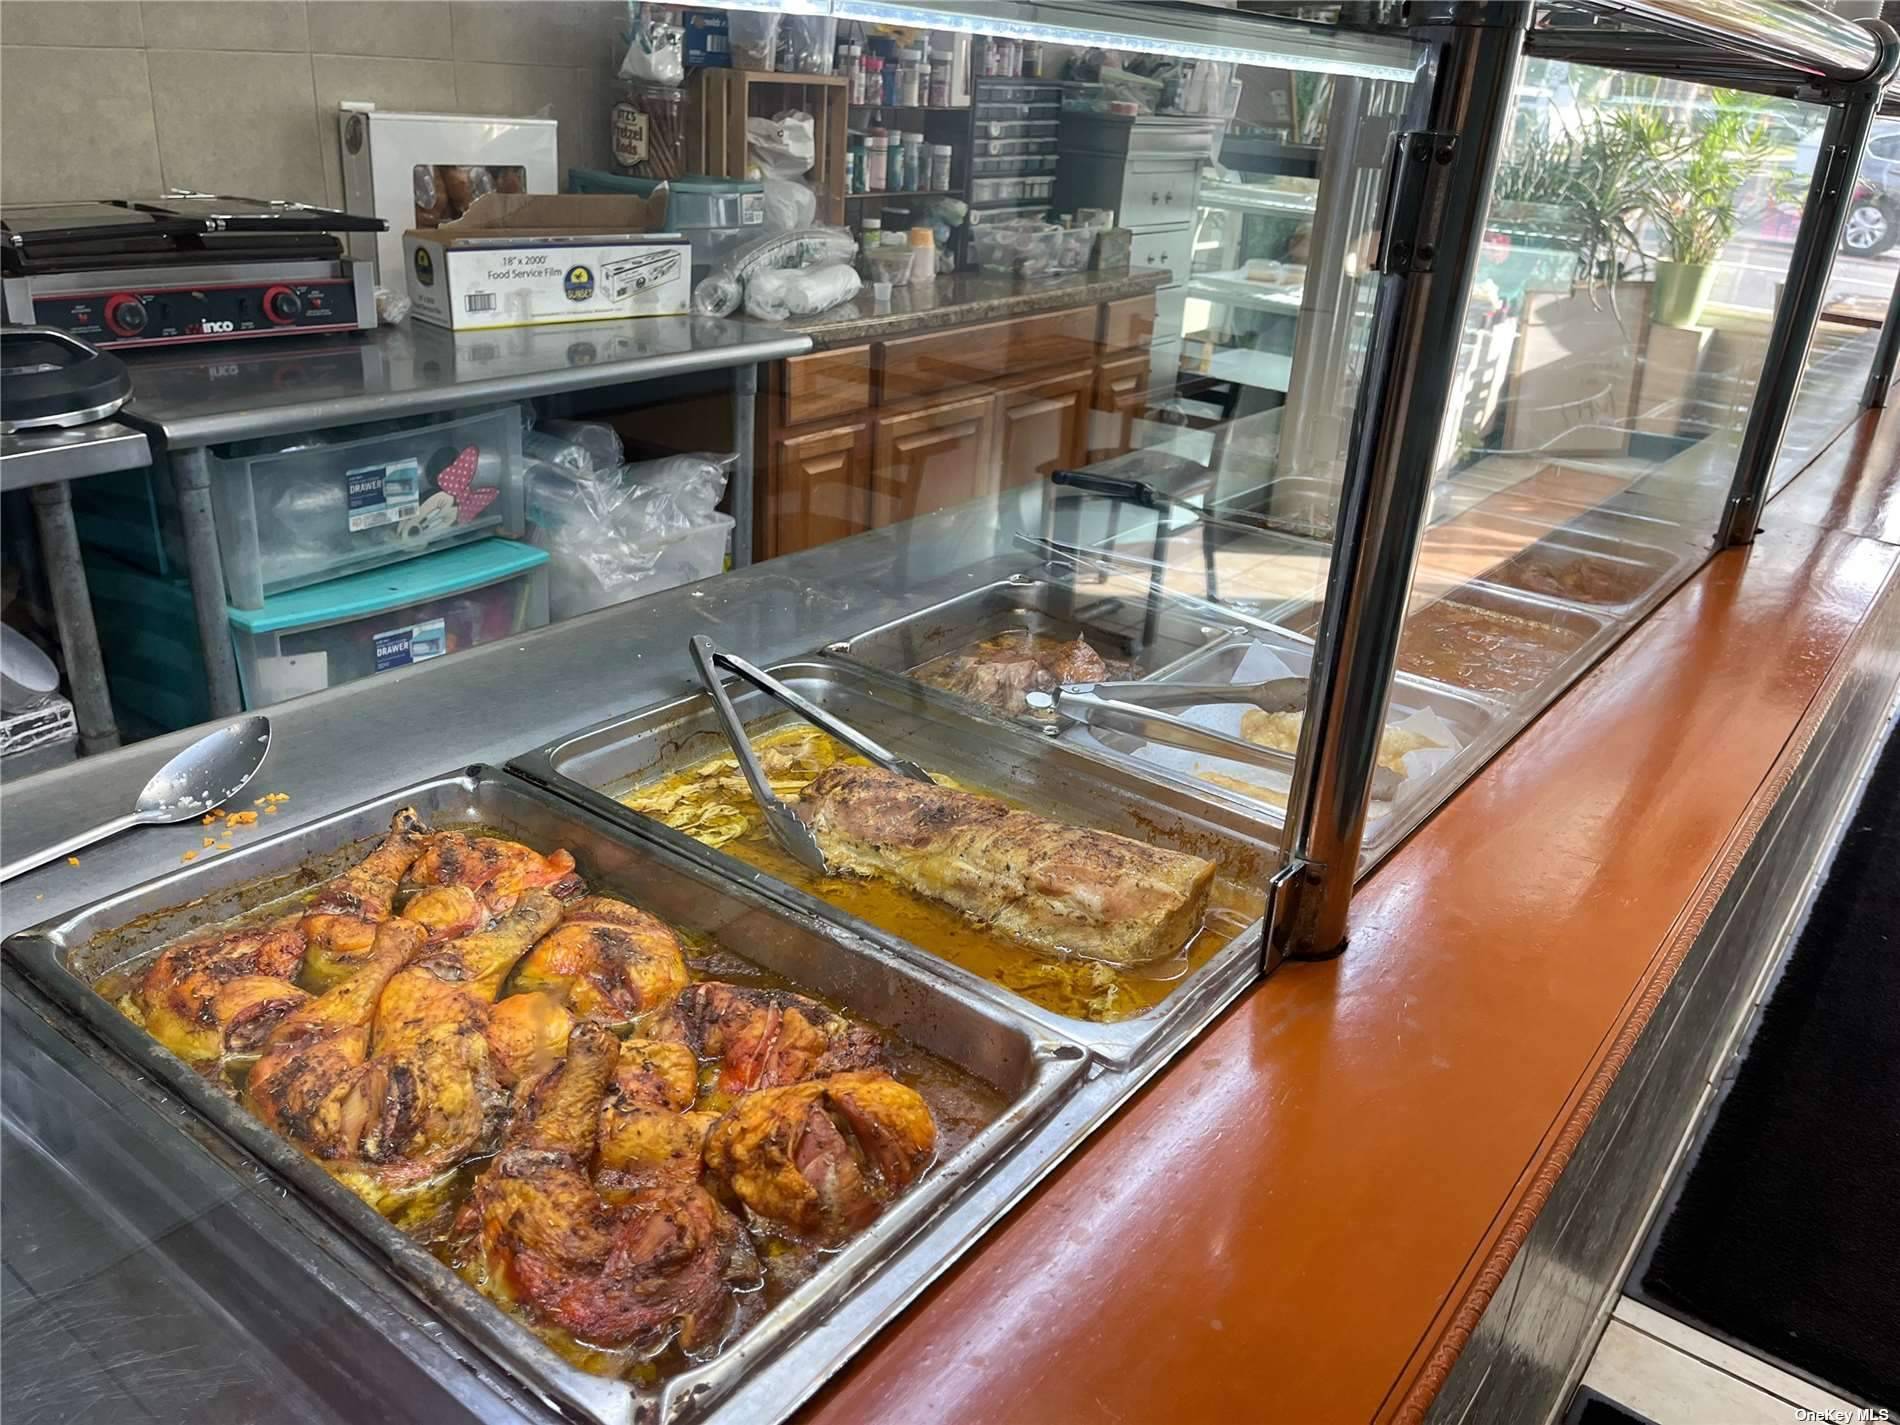 Turn Key Restaurant, all equipment and inventory is included on the sale, the restaurant is well known in Nassau County NY in business since 2016, conveniently located near Hofstra university, ...